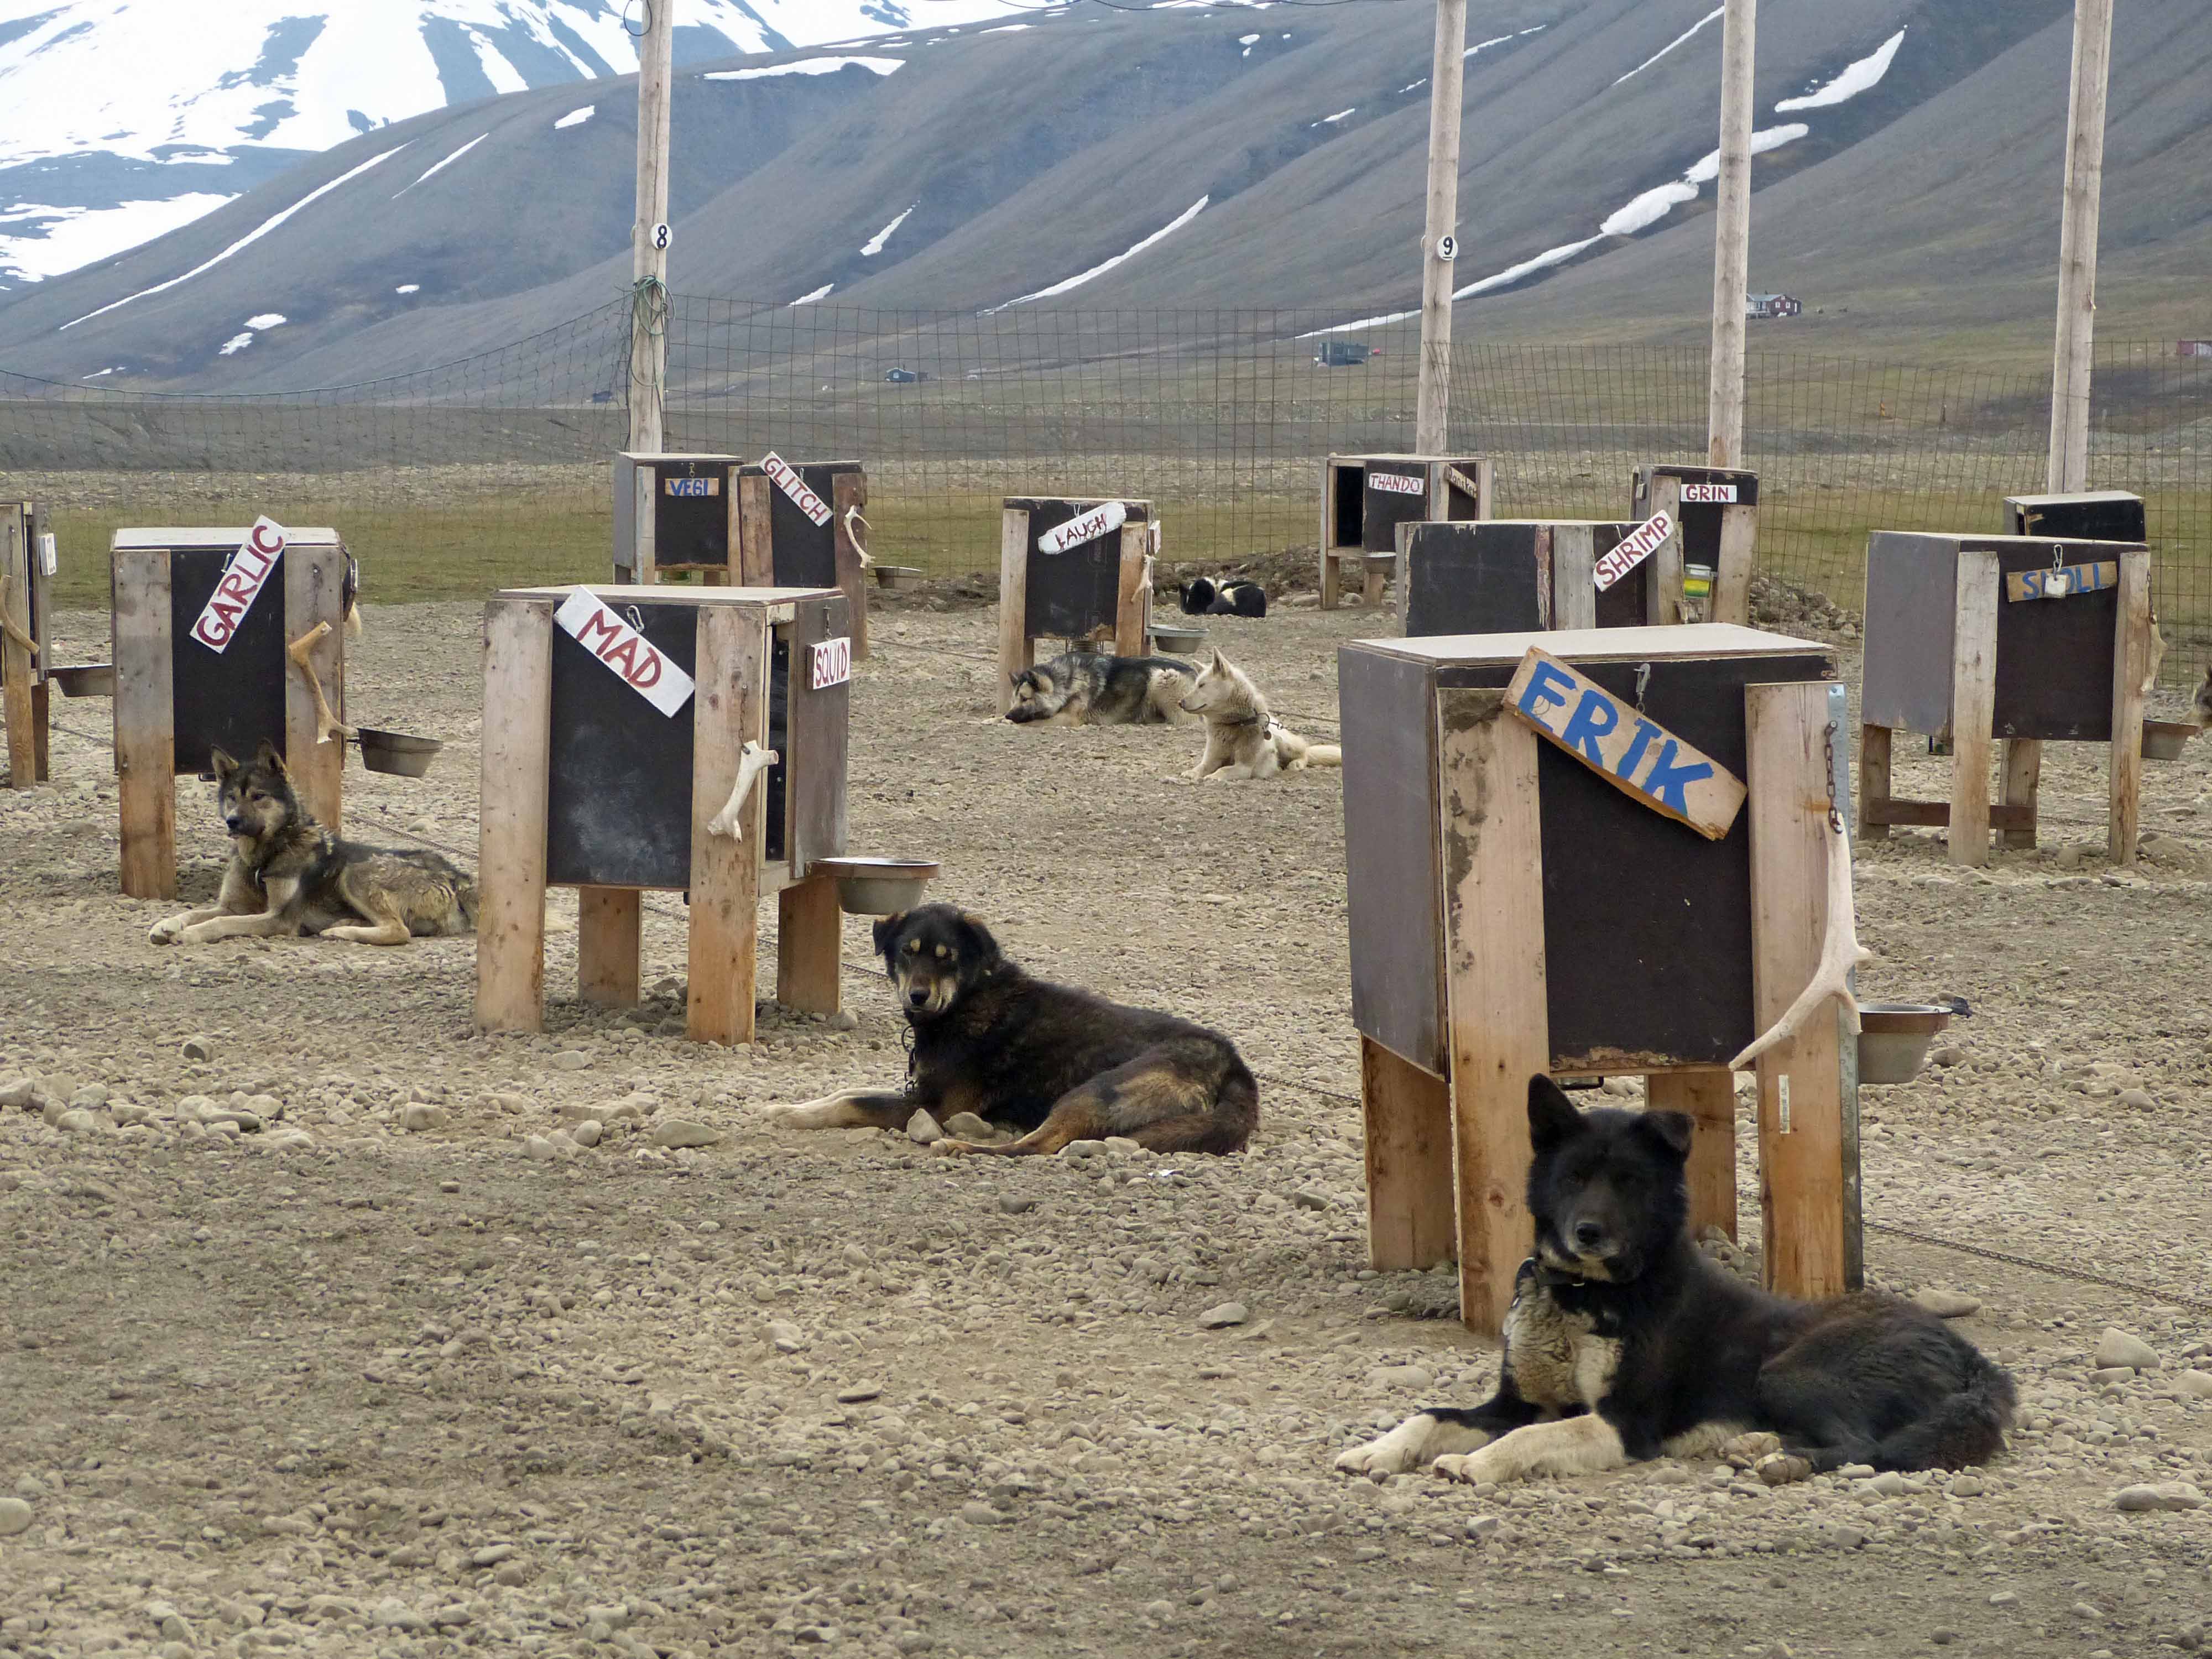 Waiting for the afternoon run, Green Dog, Longyearbyen, Svalbard, Norway